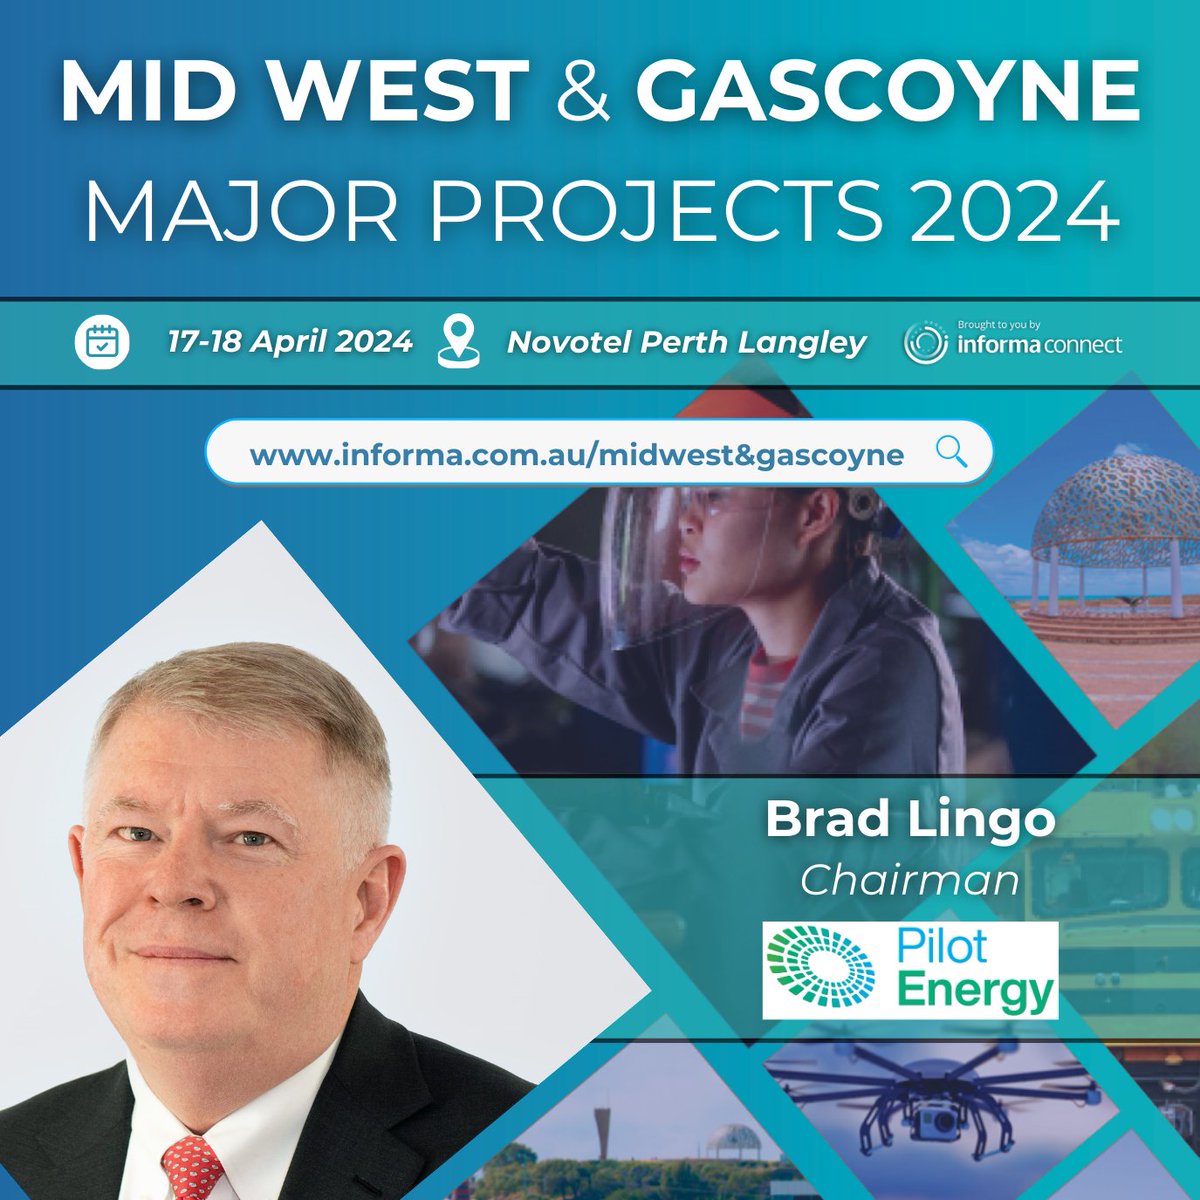 $PGY Chairman Brad Lingo will be presenting at the Mid West & Gascoyne Major Projects 2024, hosted by @InformaAustralia in Perth, April 17-18. Find out more: informa.com.au/midwest&gascoy… #Midwestgascoyne24 #midwestcleanenergyproject #ccs #carboncapture #hydrogen #ammonia